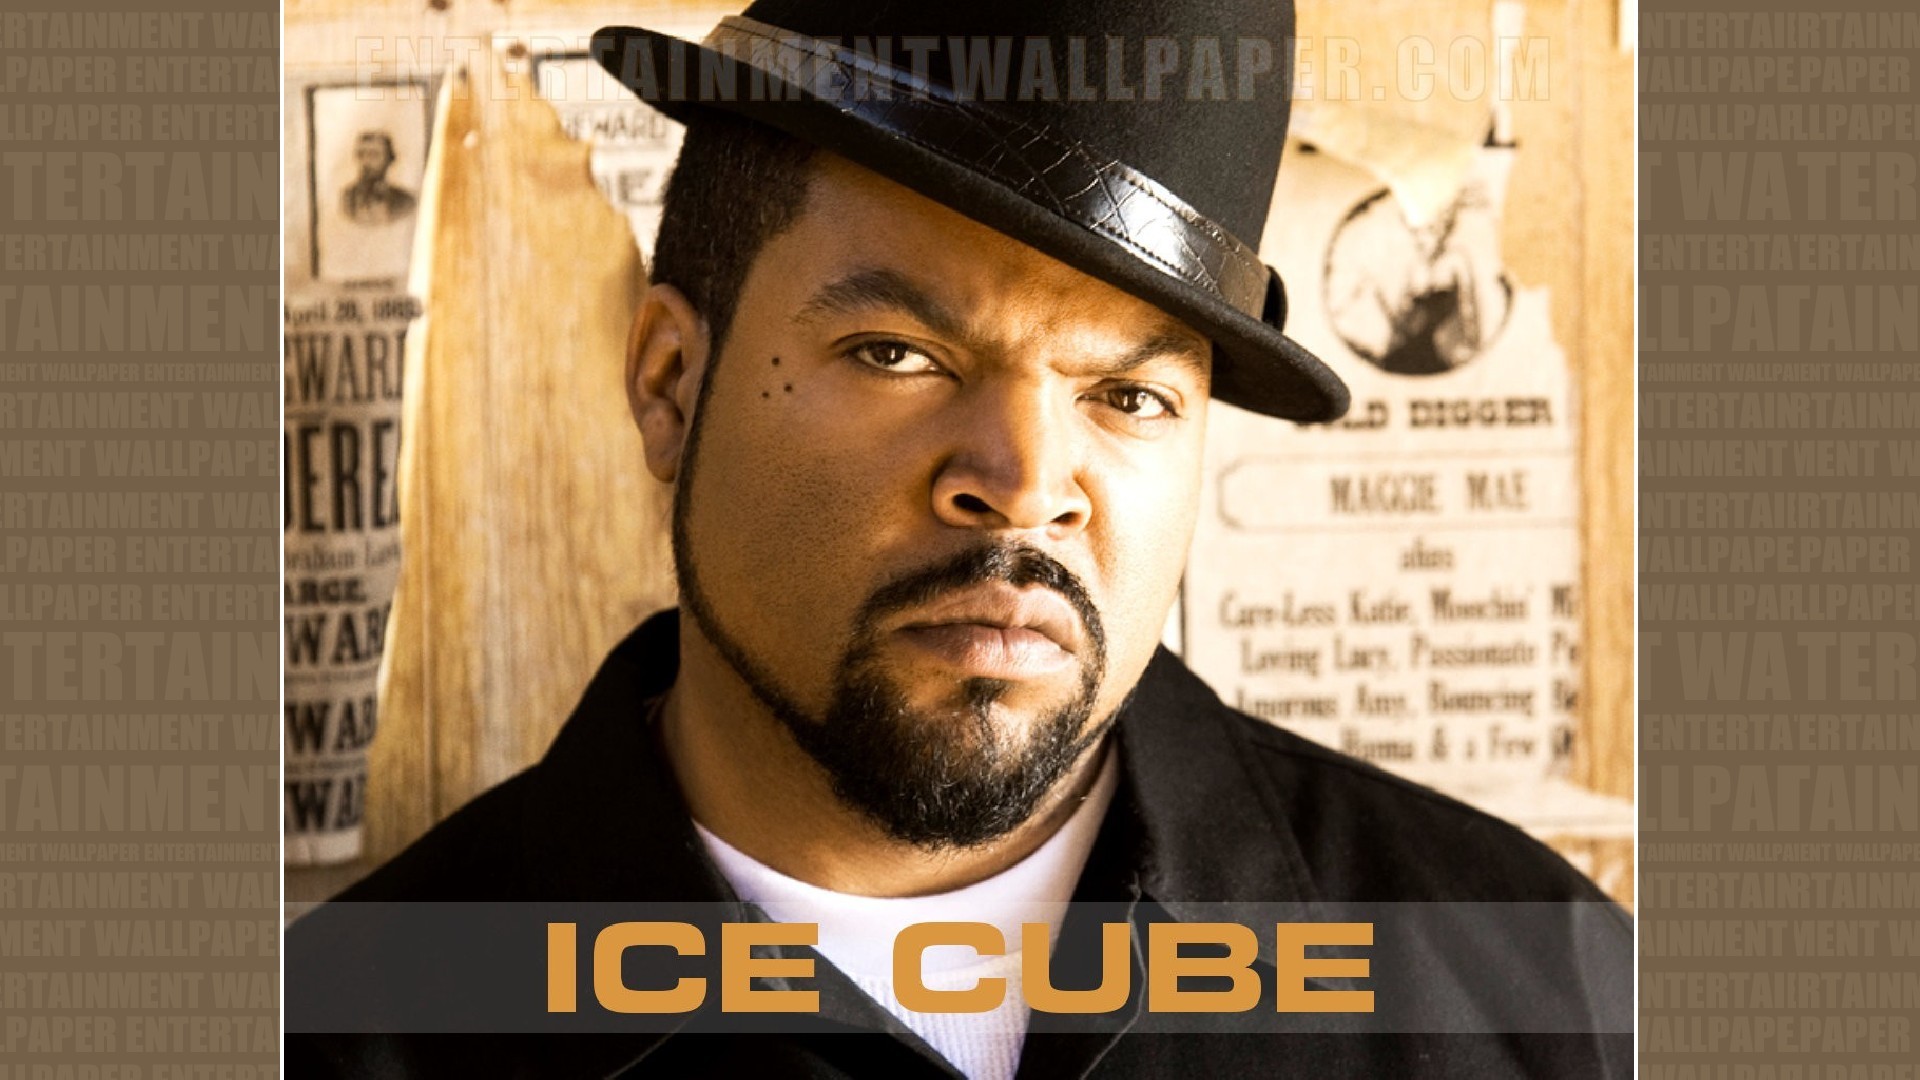 1920x1080 Ice Cube Wallpaper - Original size, download now.